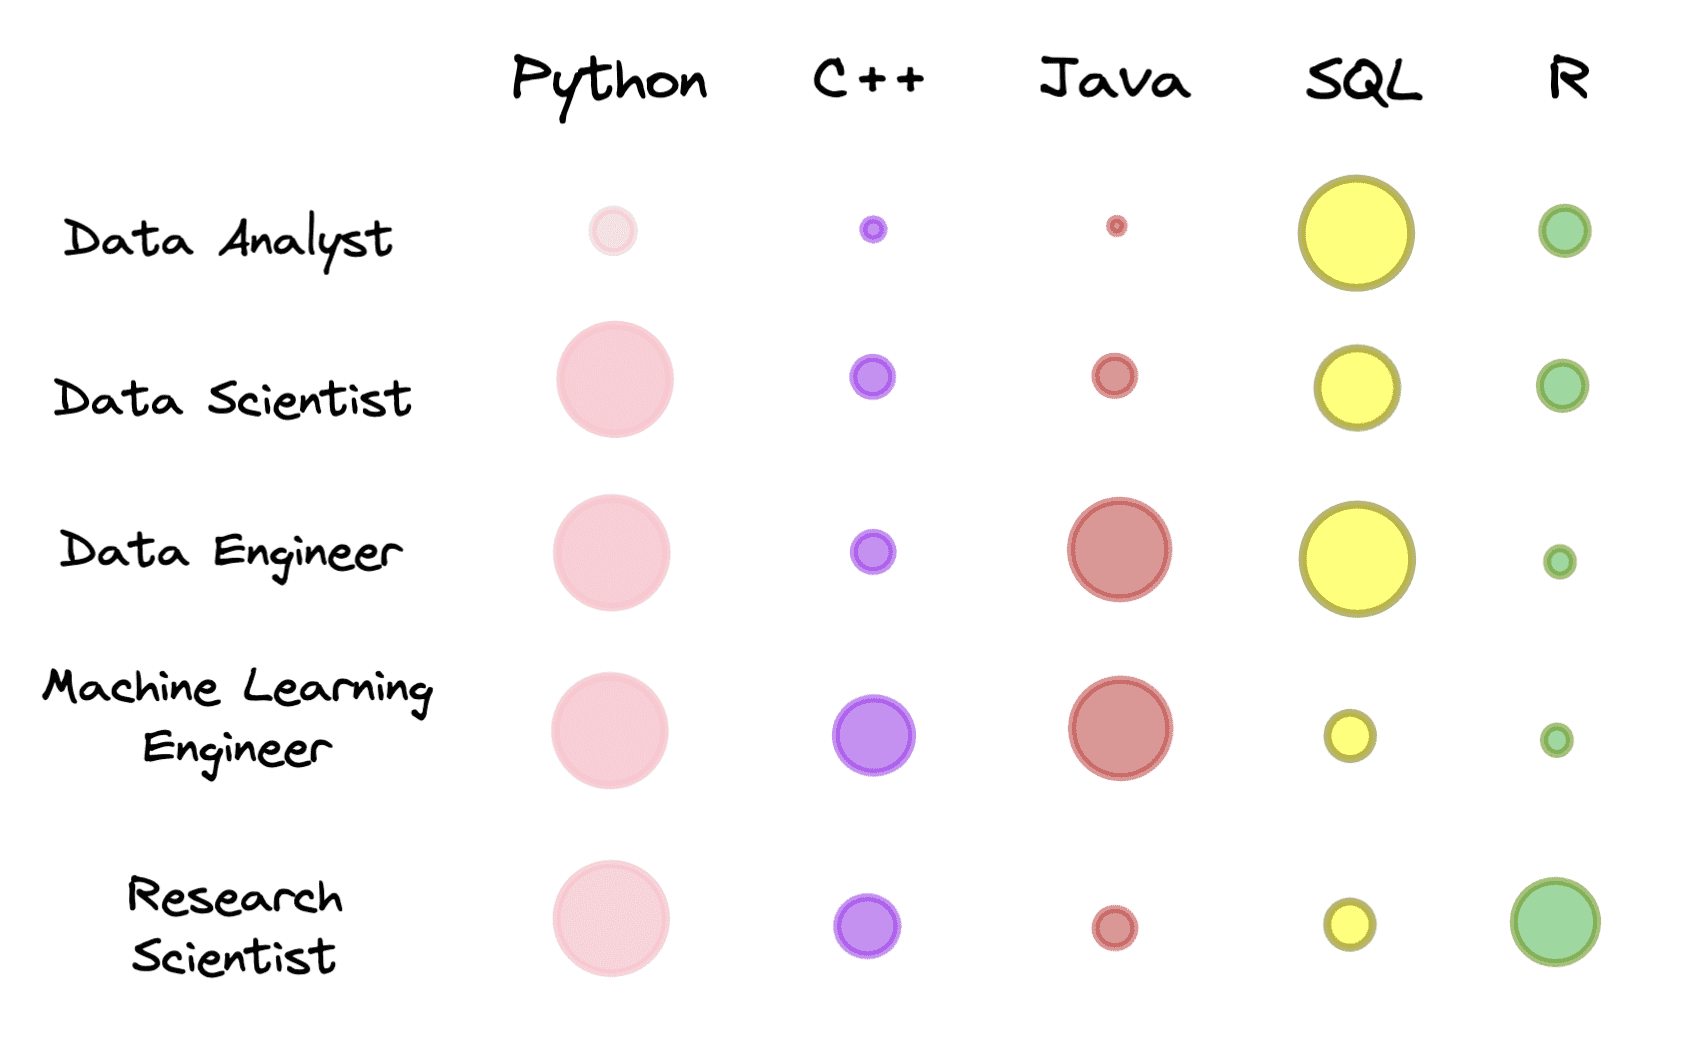 Programming Languages for Specific Data Roles